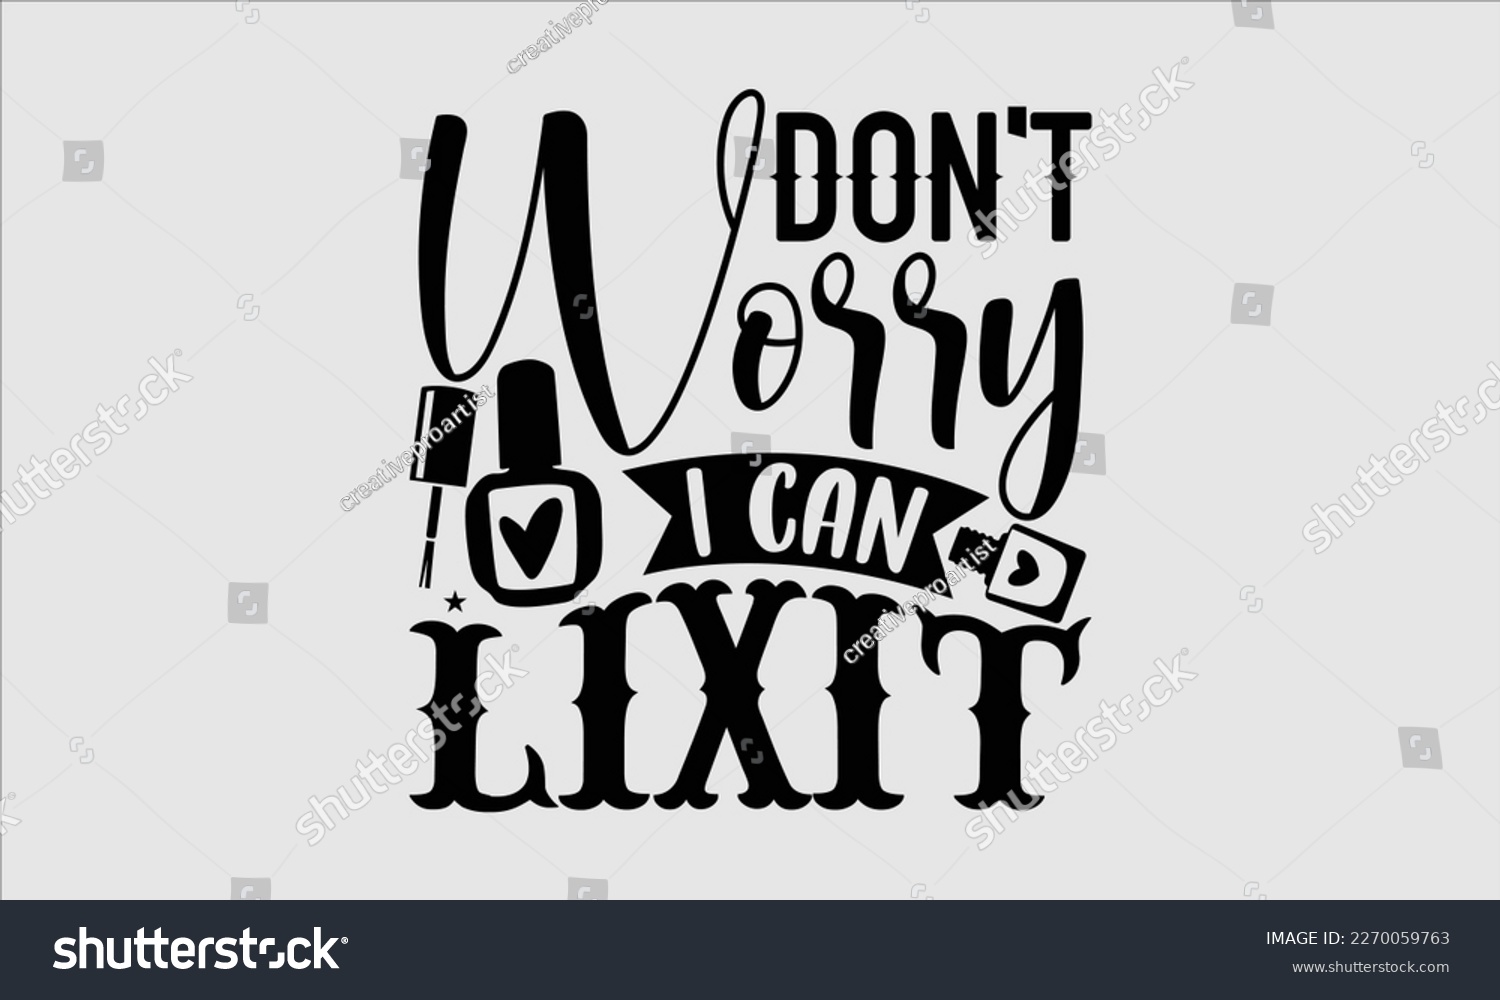 SVG of Don't worry i can lixit- Nail Tech t shirts design, Hand written lettering phrase, Isolated on white background,  Calligraphy graphic for Cutting Machine, svg eps 10. svg